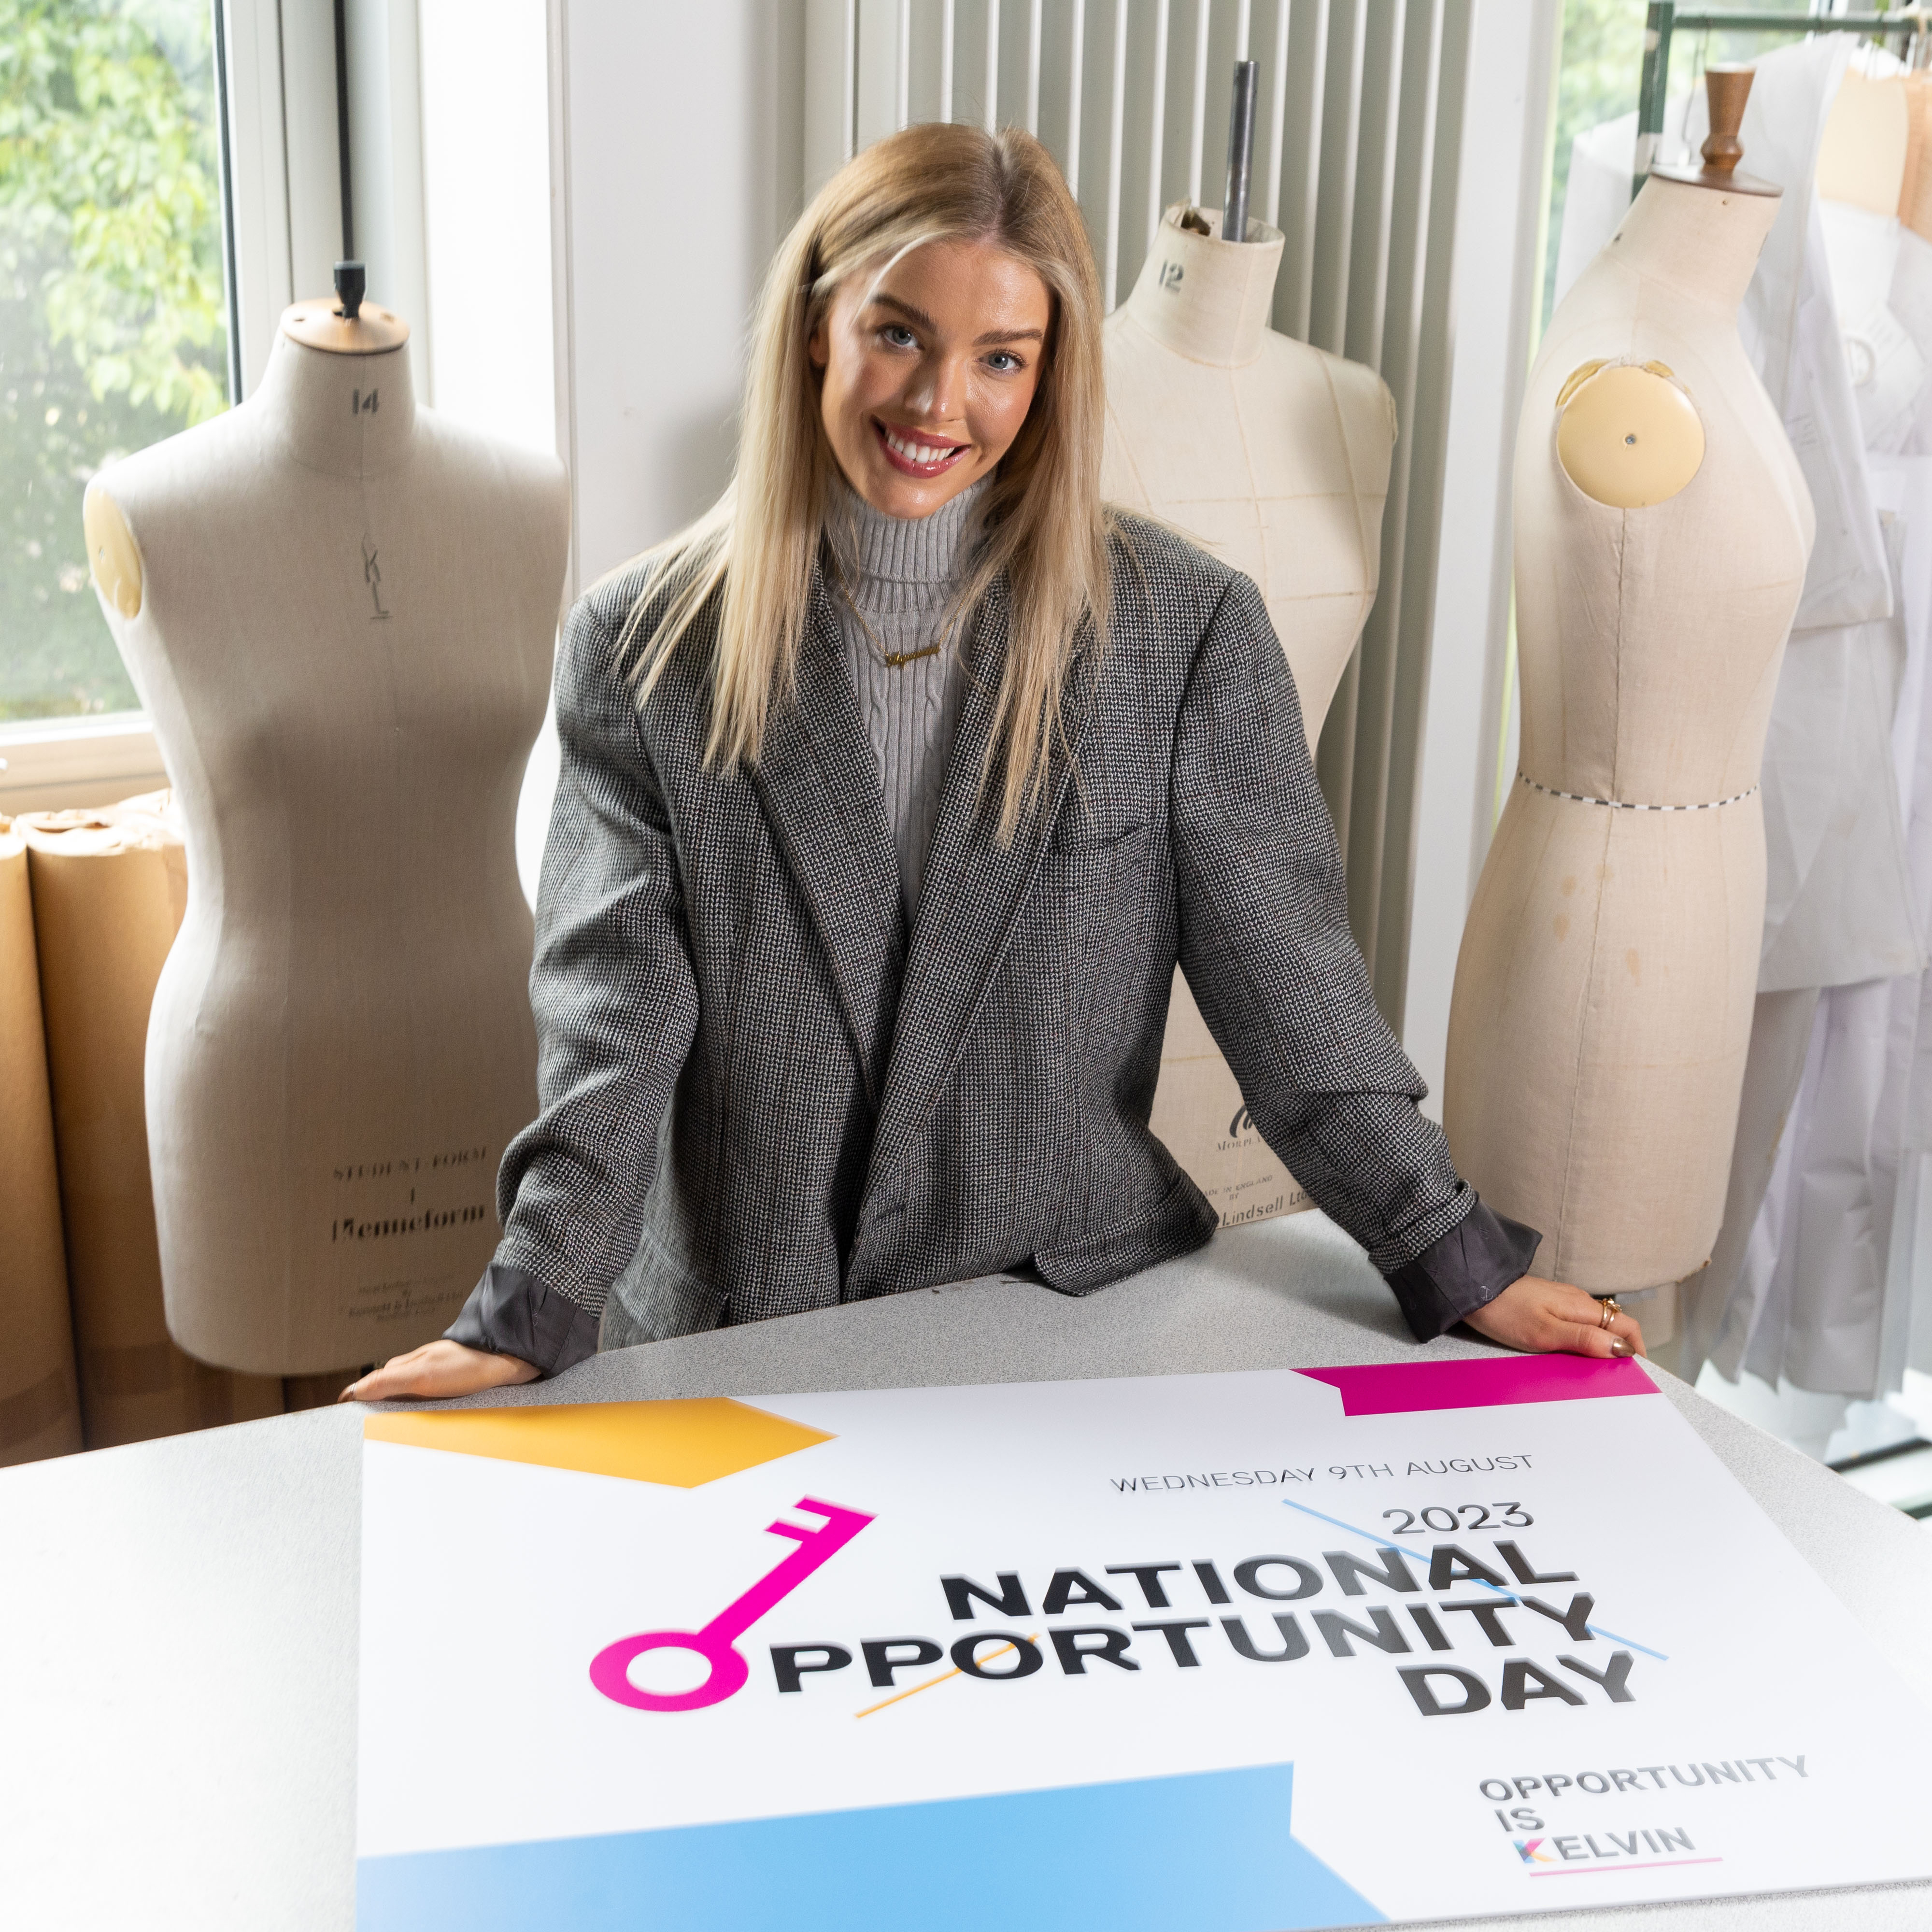 A person with long blonde hair stands in front of dressmaking mannequins. In front of her on a table, a sign reads National Opportunity Day